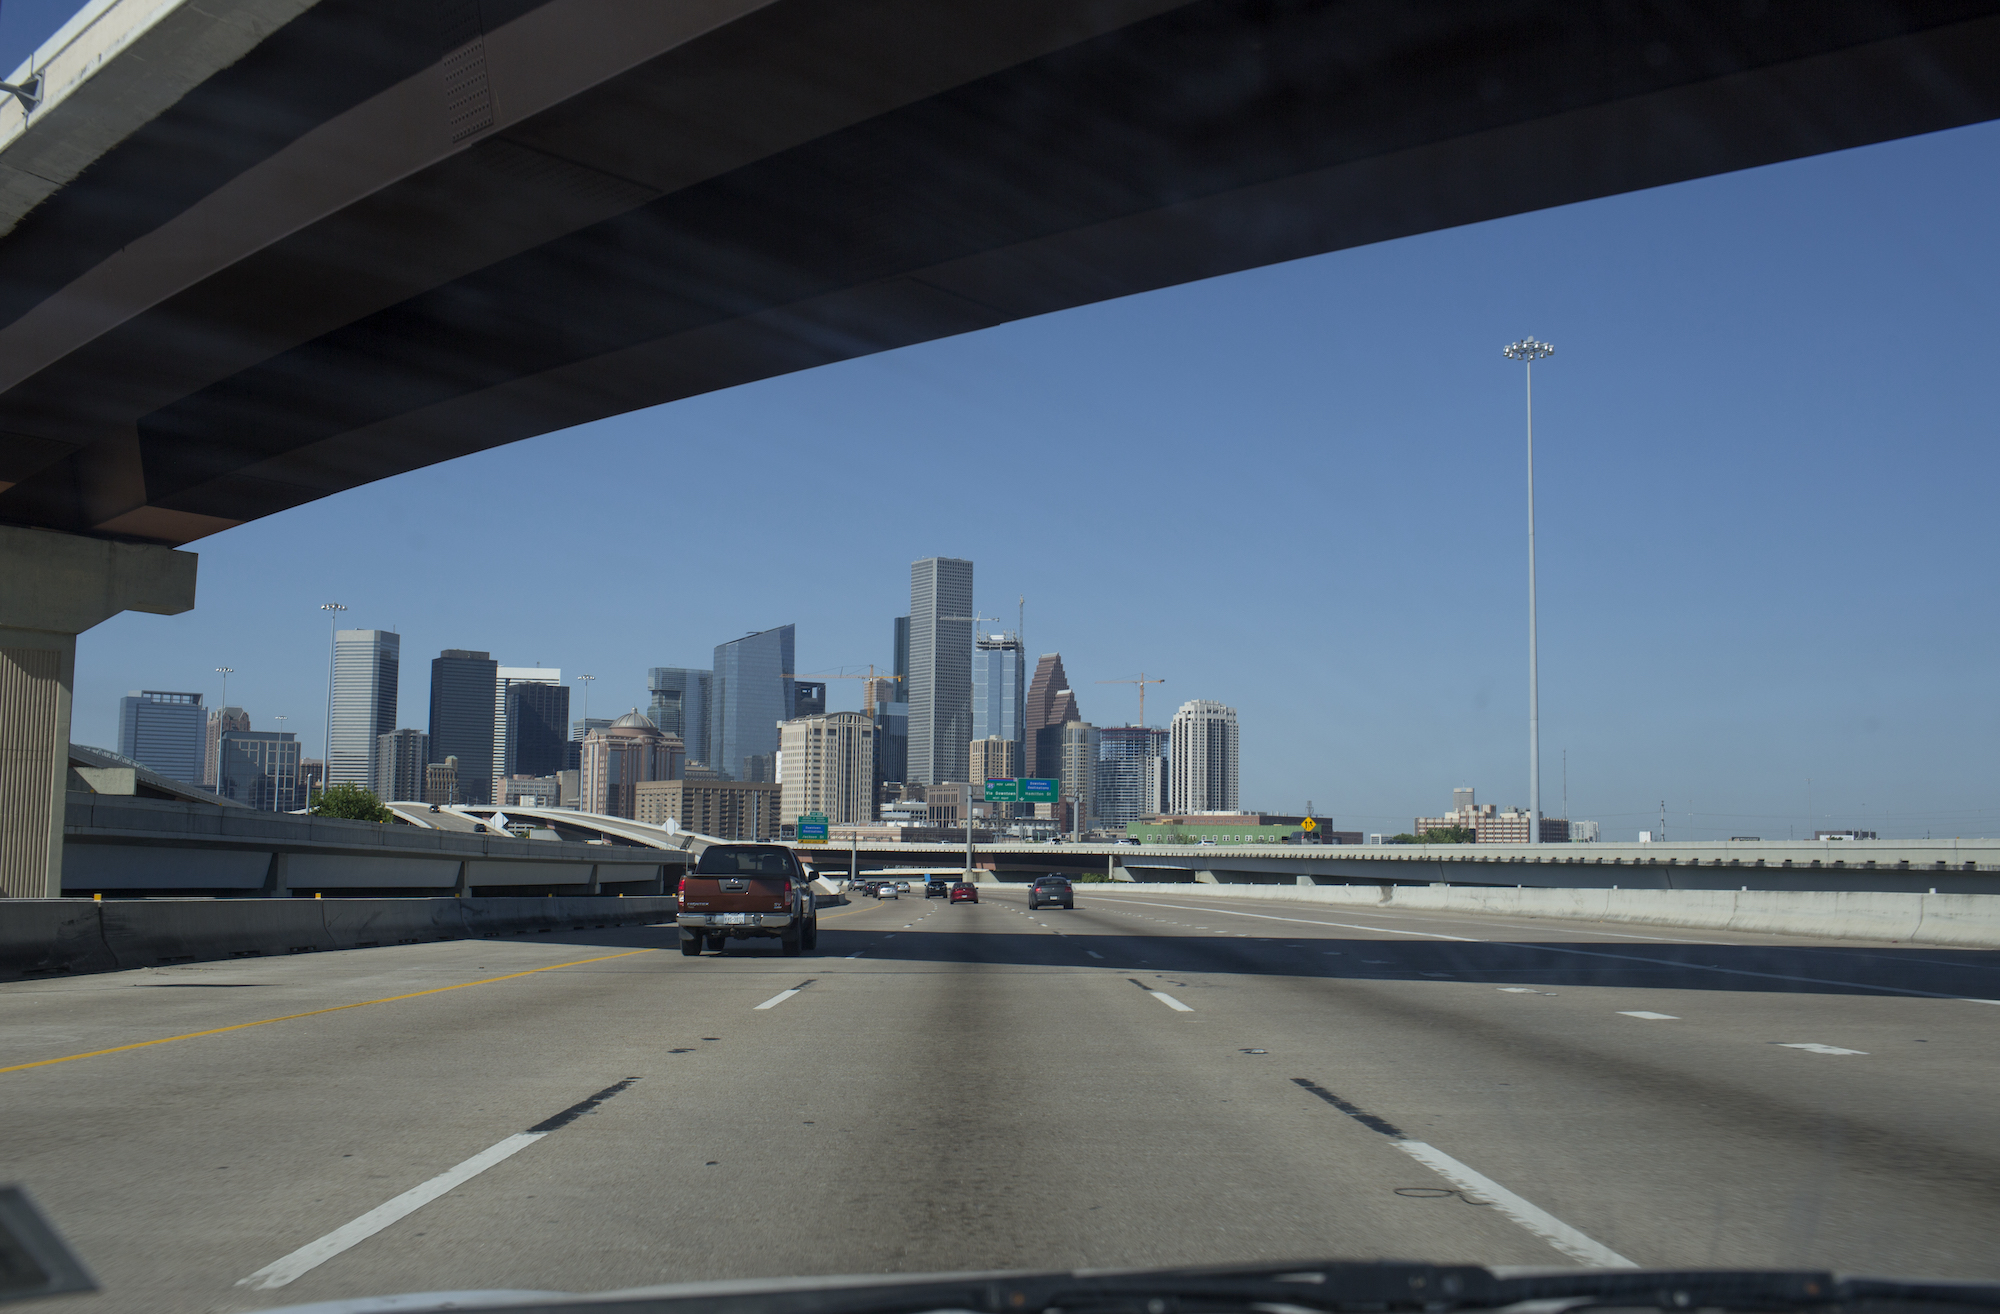 The Houston skyline appears above an intersection of freeways approaching from the east on April 11, 2021, in Houston, Texas on a post-vaccination road trip